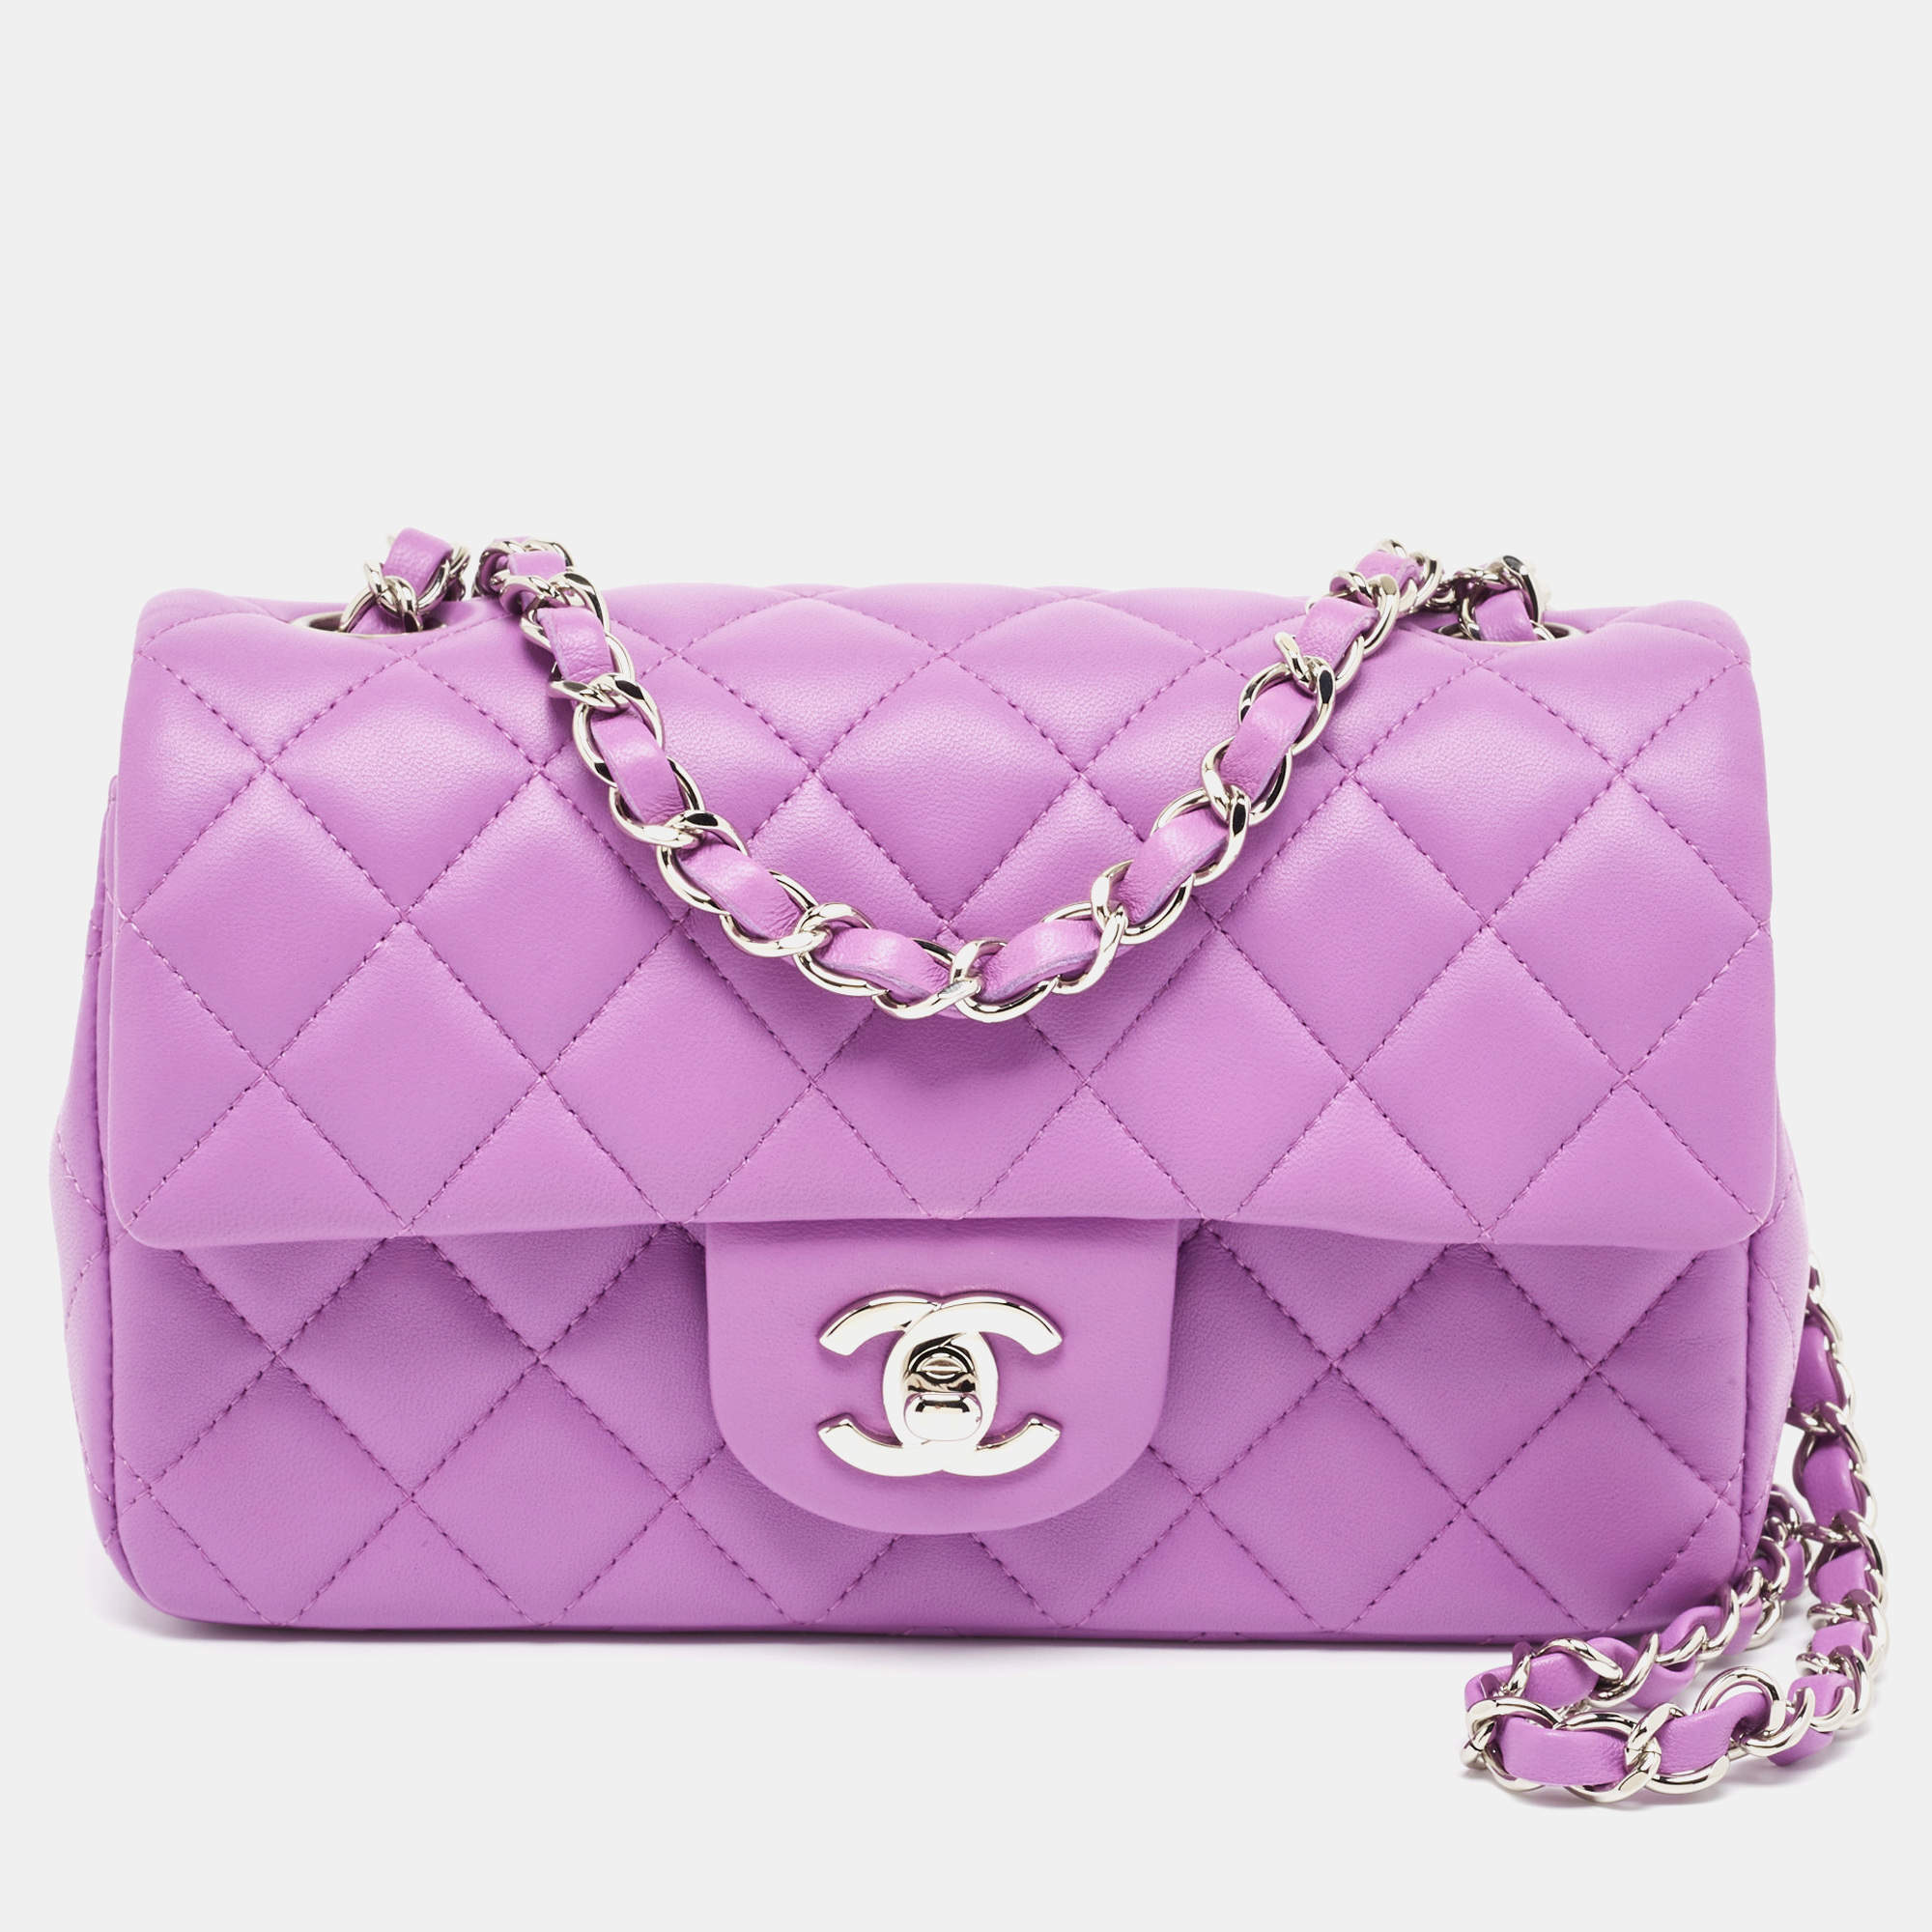 Chanel Purple Quilted Leather New Mini Classic Single Flap Bag